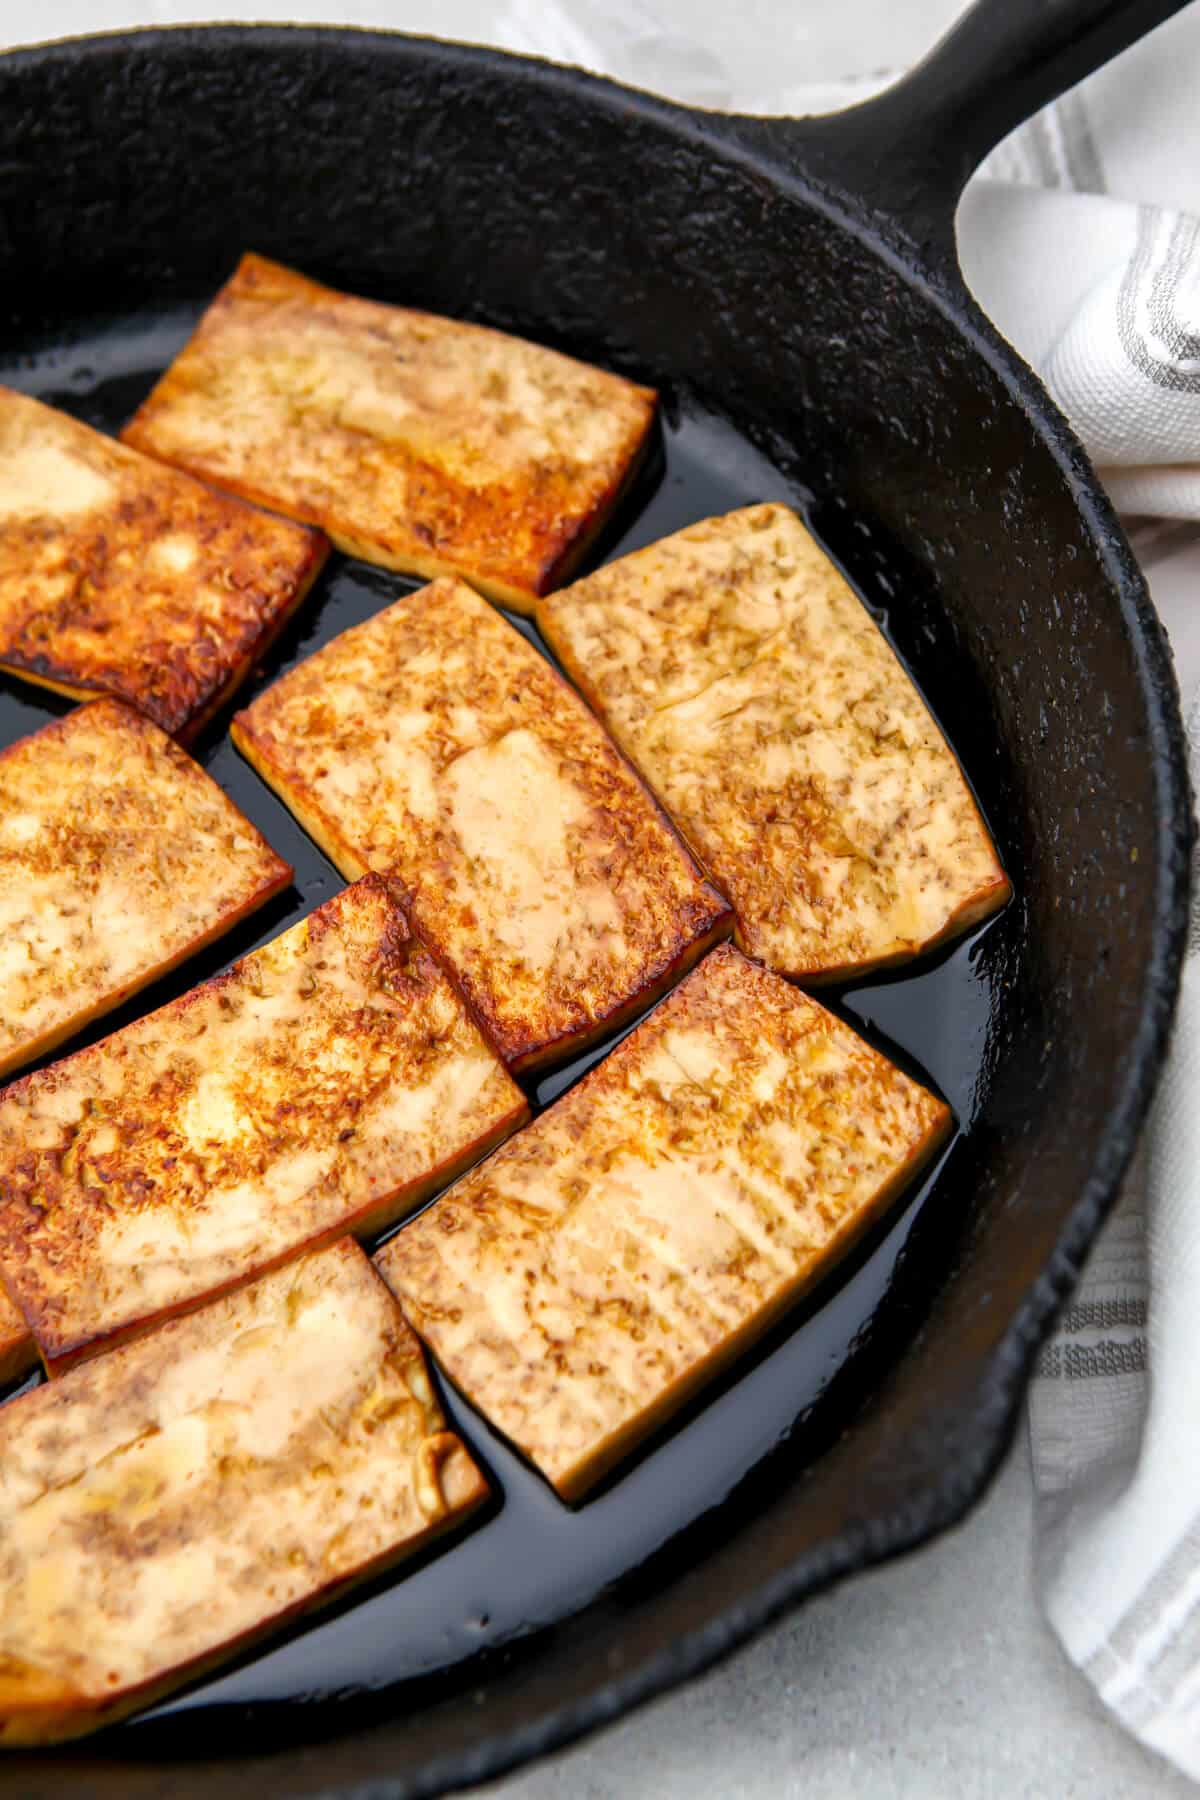 Sliced marinated tofu cooking in an iron skillet.